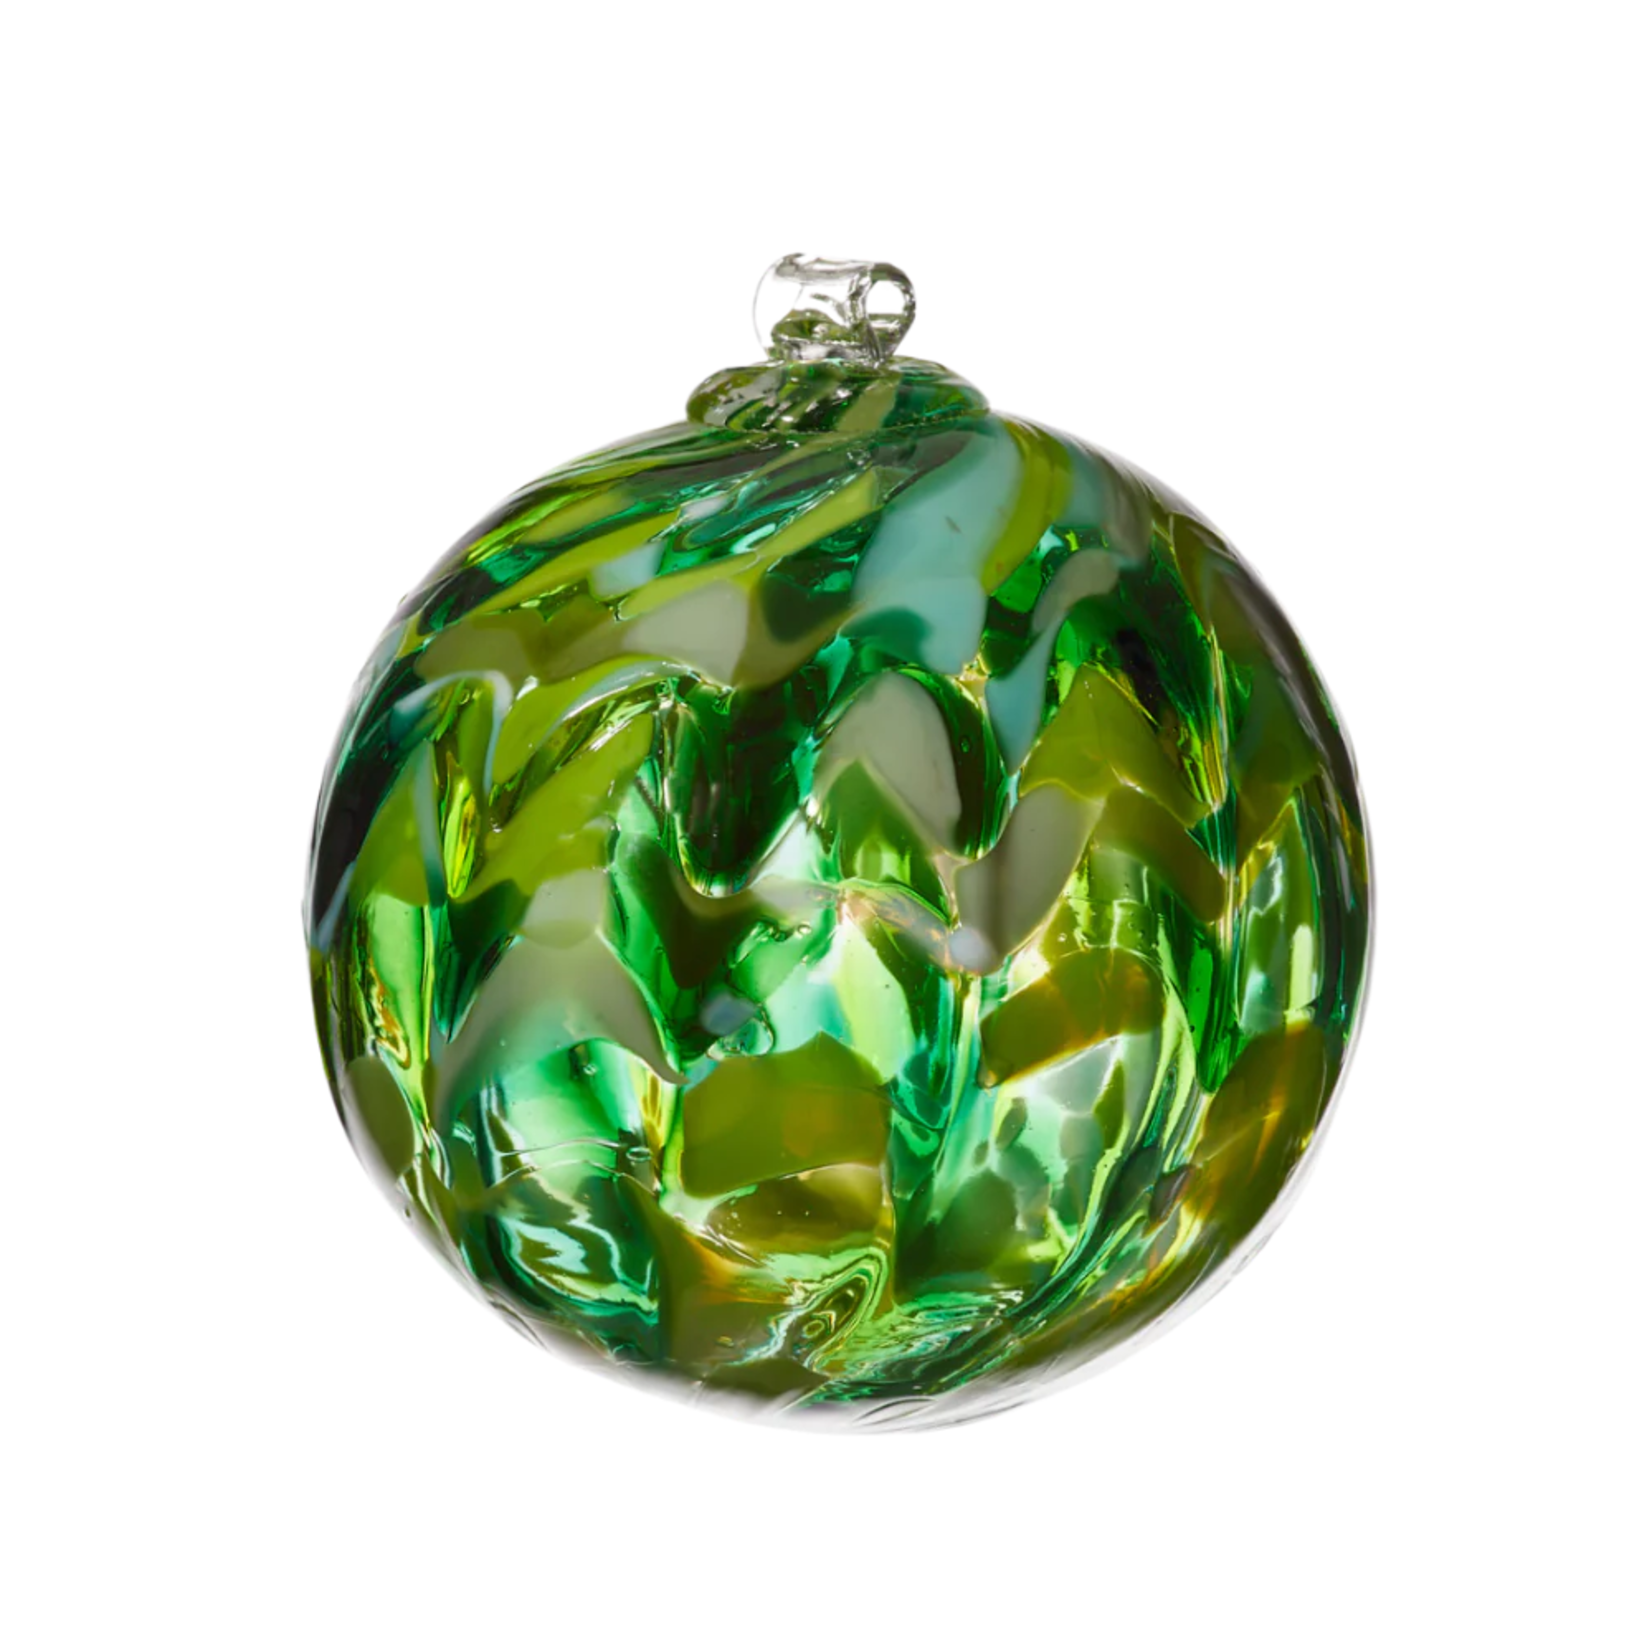 KITRAS Nature's Whimsy Orb - Meadow Green